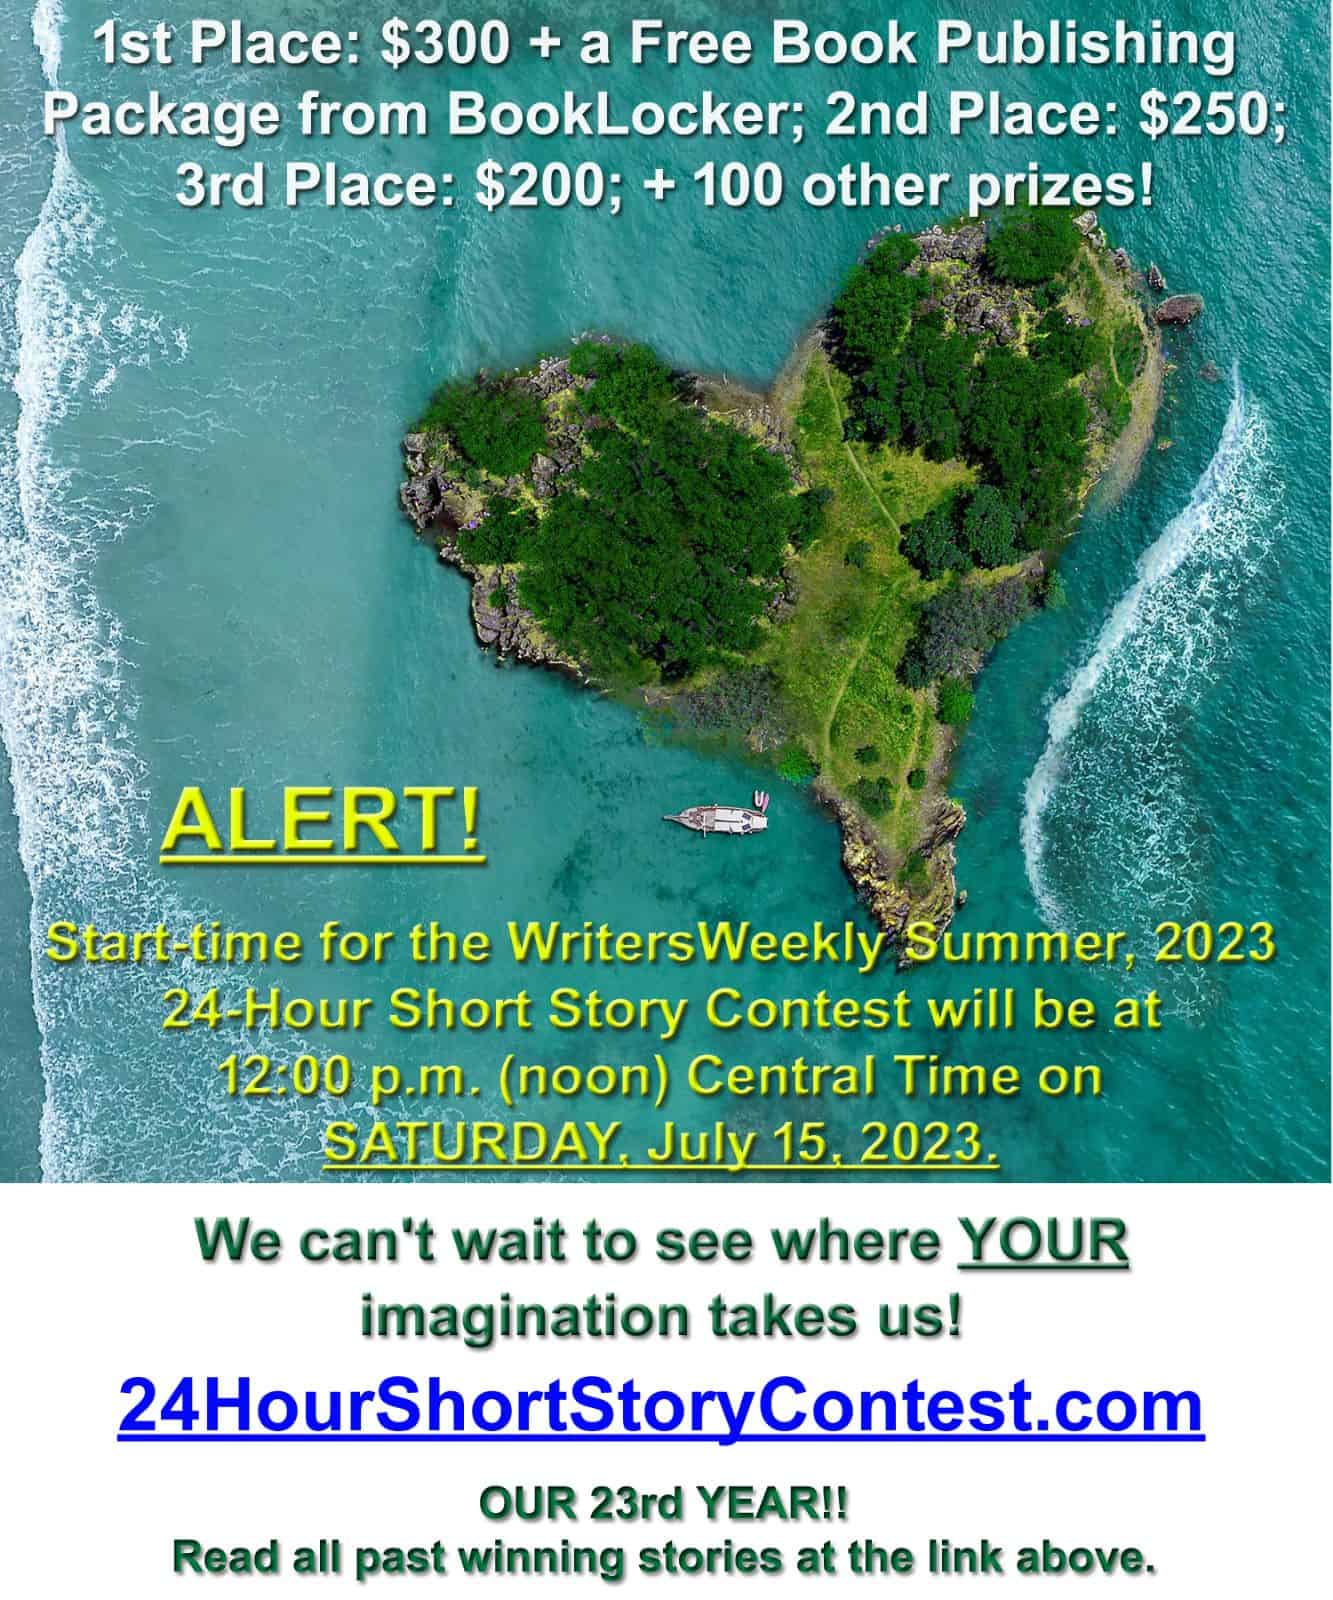 DON’T FORGET! The Summer, 2023 24-Hour Short Story Contest is SATURDAY, 7/15/23!